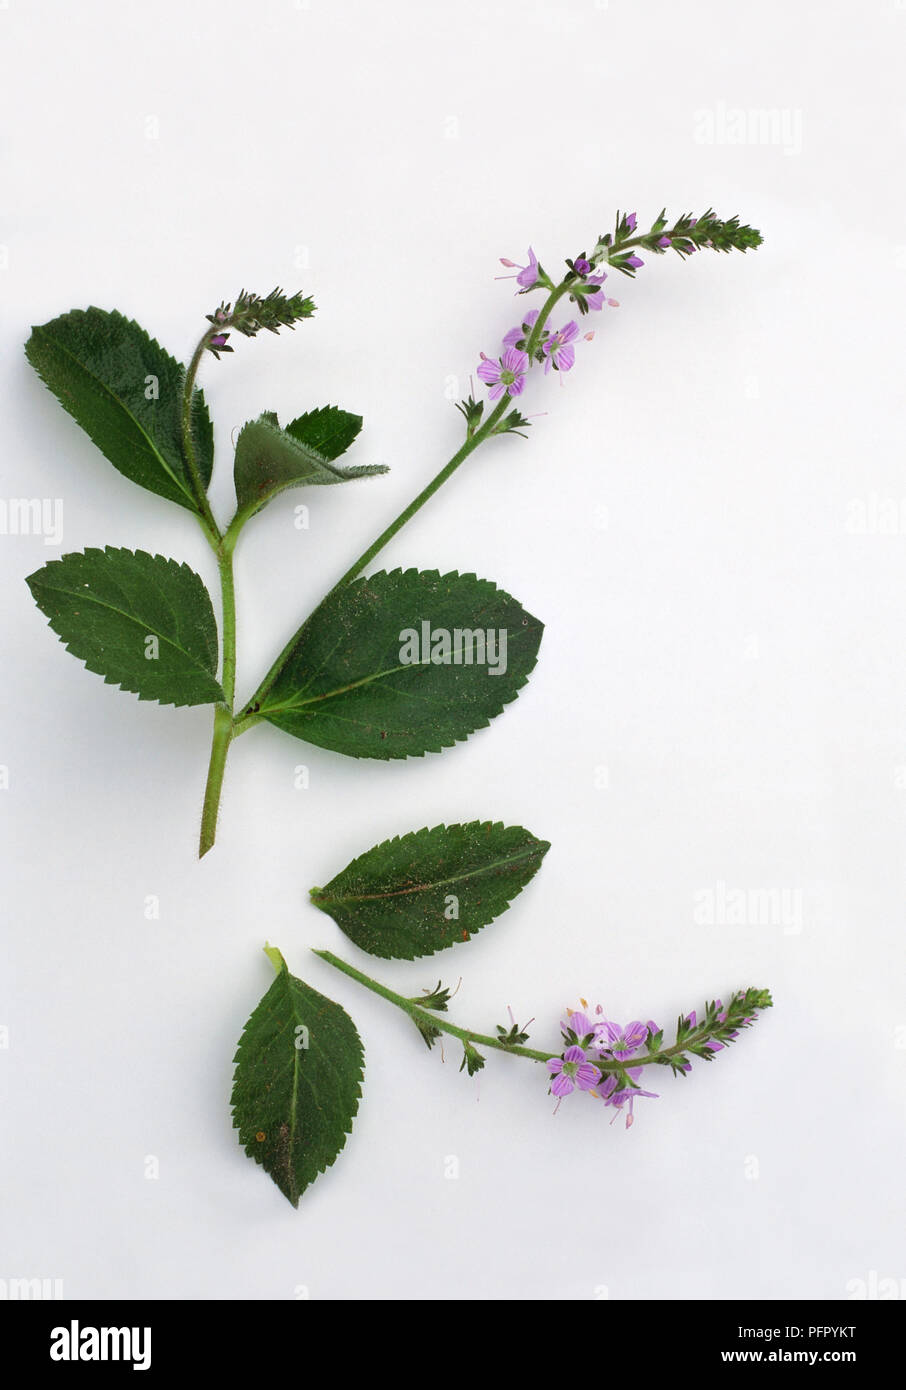 Veronica officinalis (Heath speedwell), stem with leaves and purple flowers in slender racemes Stock Photo